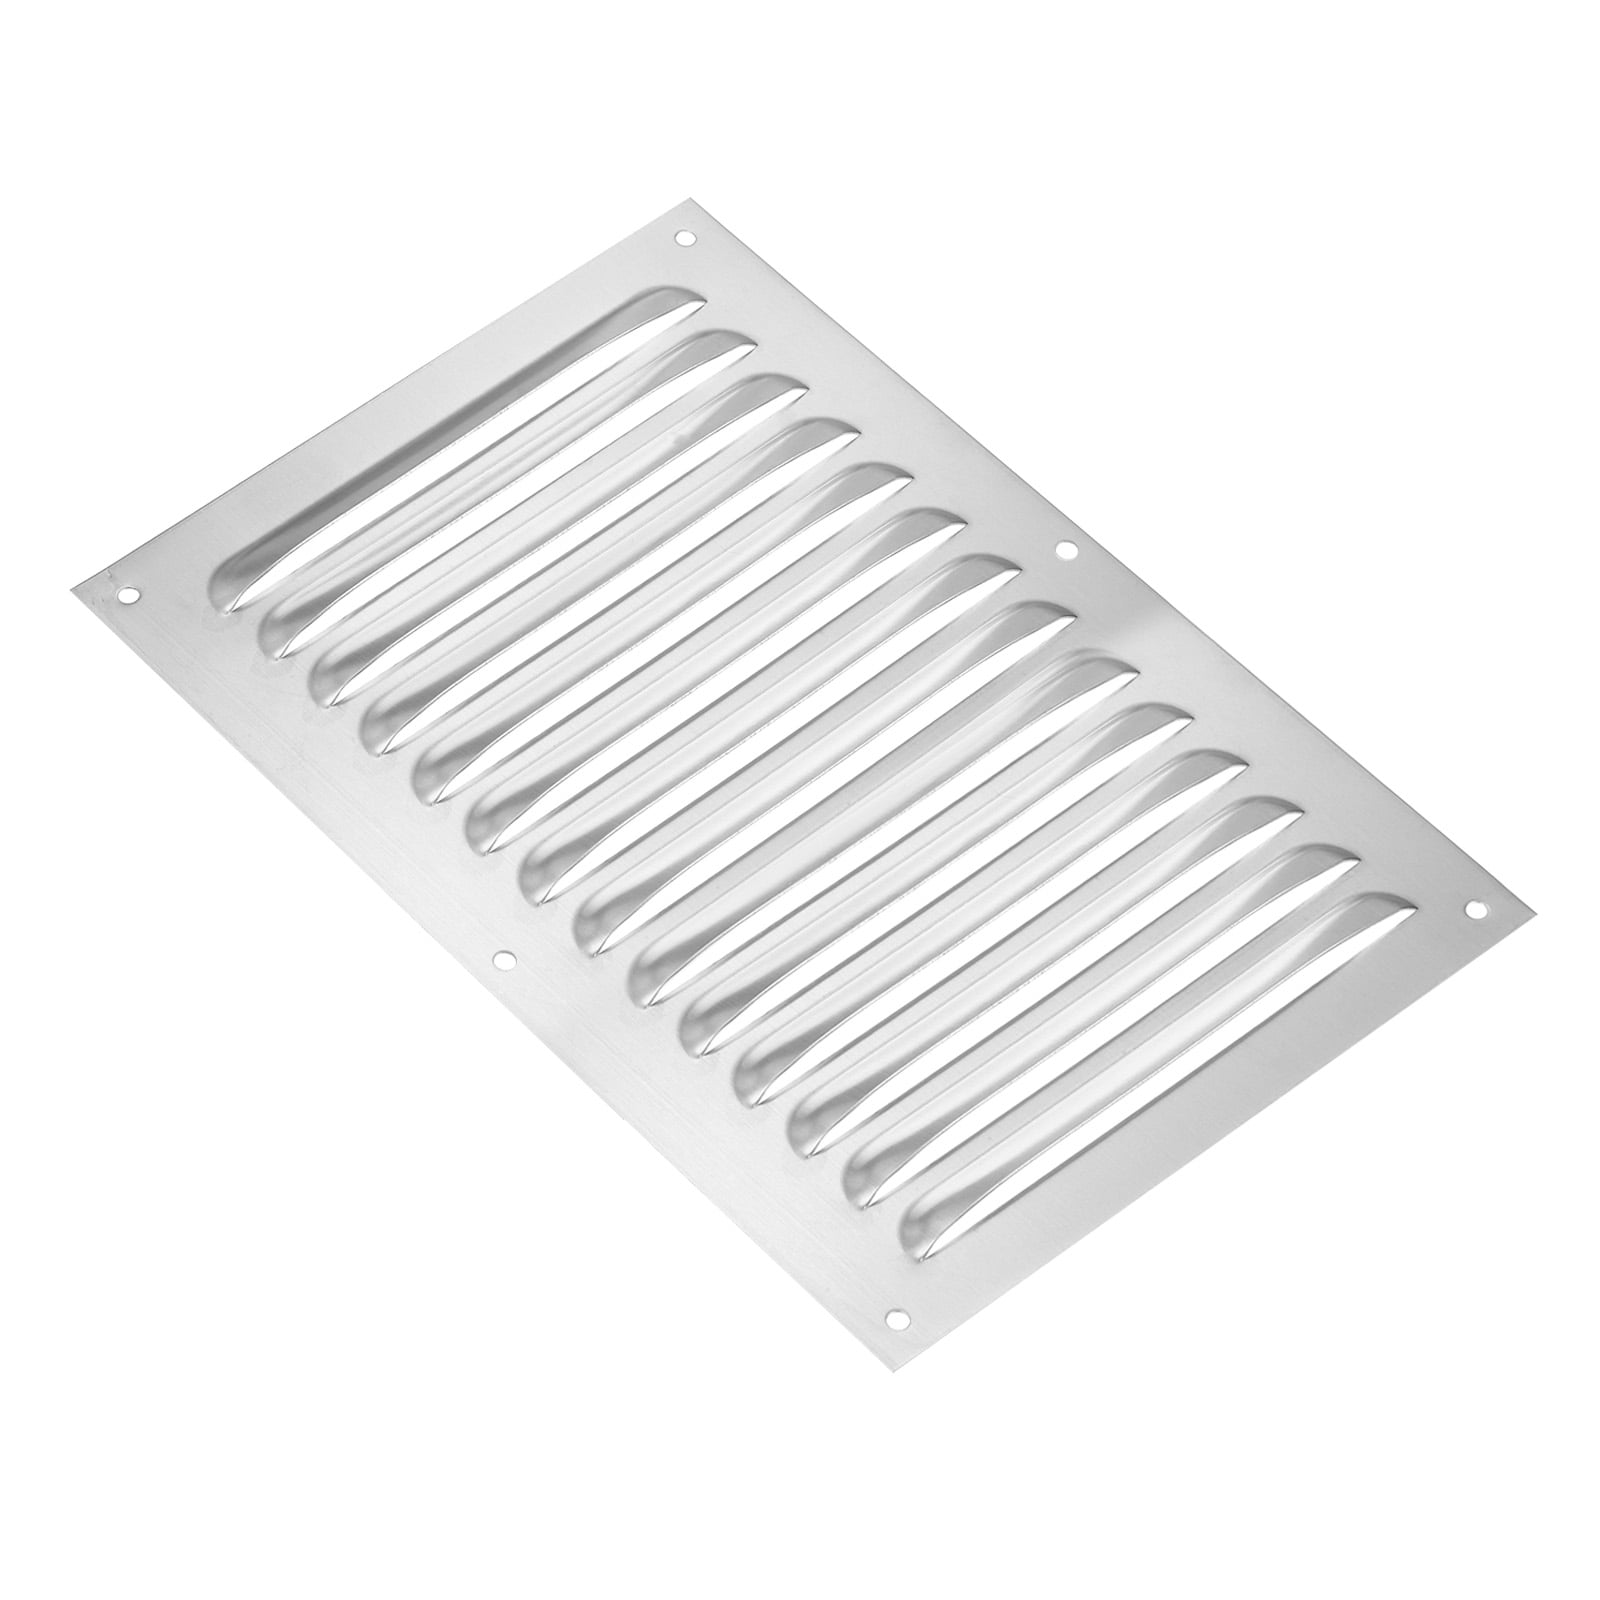 Uxcell 8 x 12 inch Vent Cover, 304 Stainless Steel Screen Mesh Air Grille HVAC Louvered Ventilation Cover, Silver